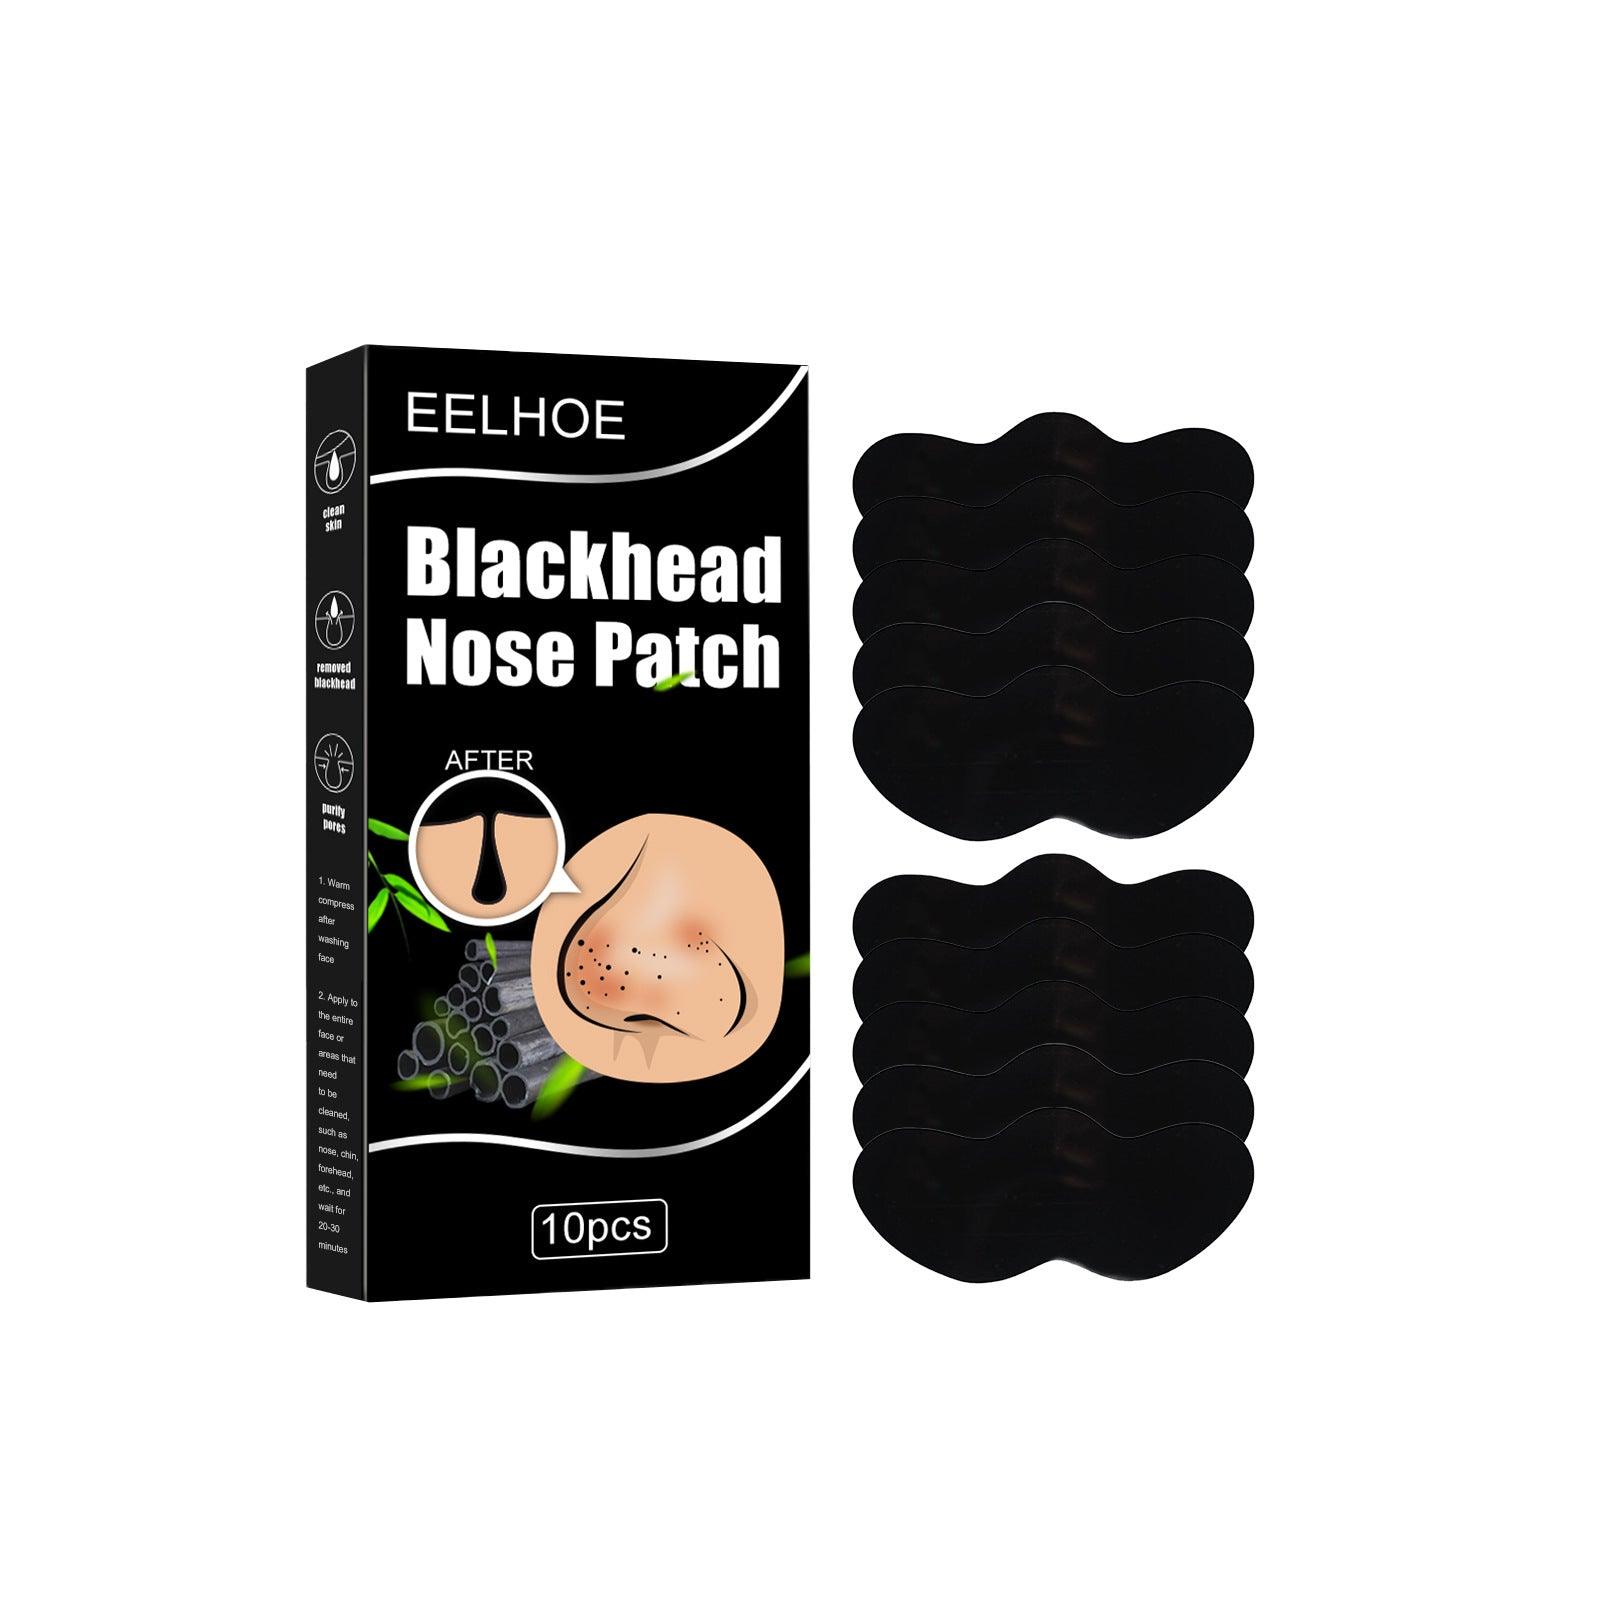 EELHOE Bamboo Charcoal Blackhead Removing Strips Blackhead T-zone Care Shrink Pore Nose Patch Clear Mask 10pcs